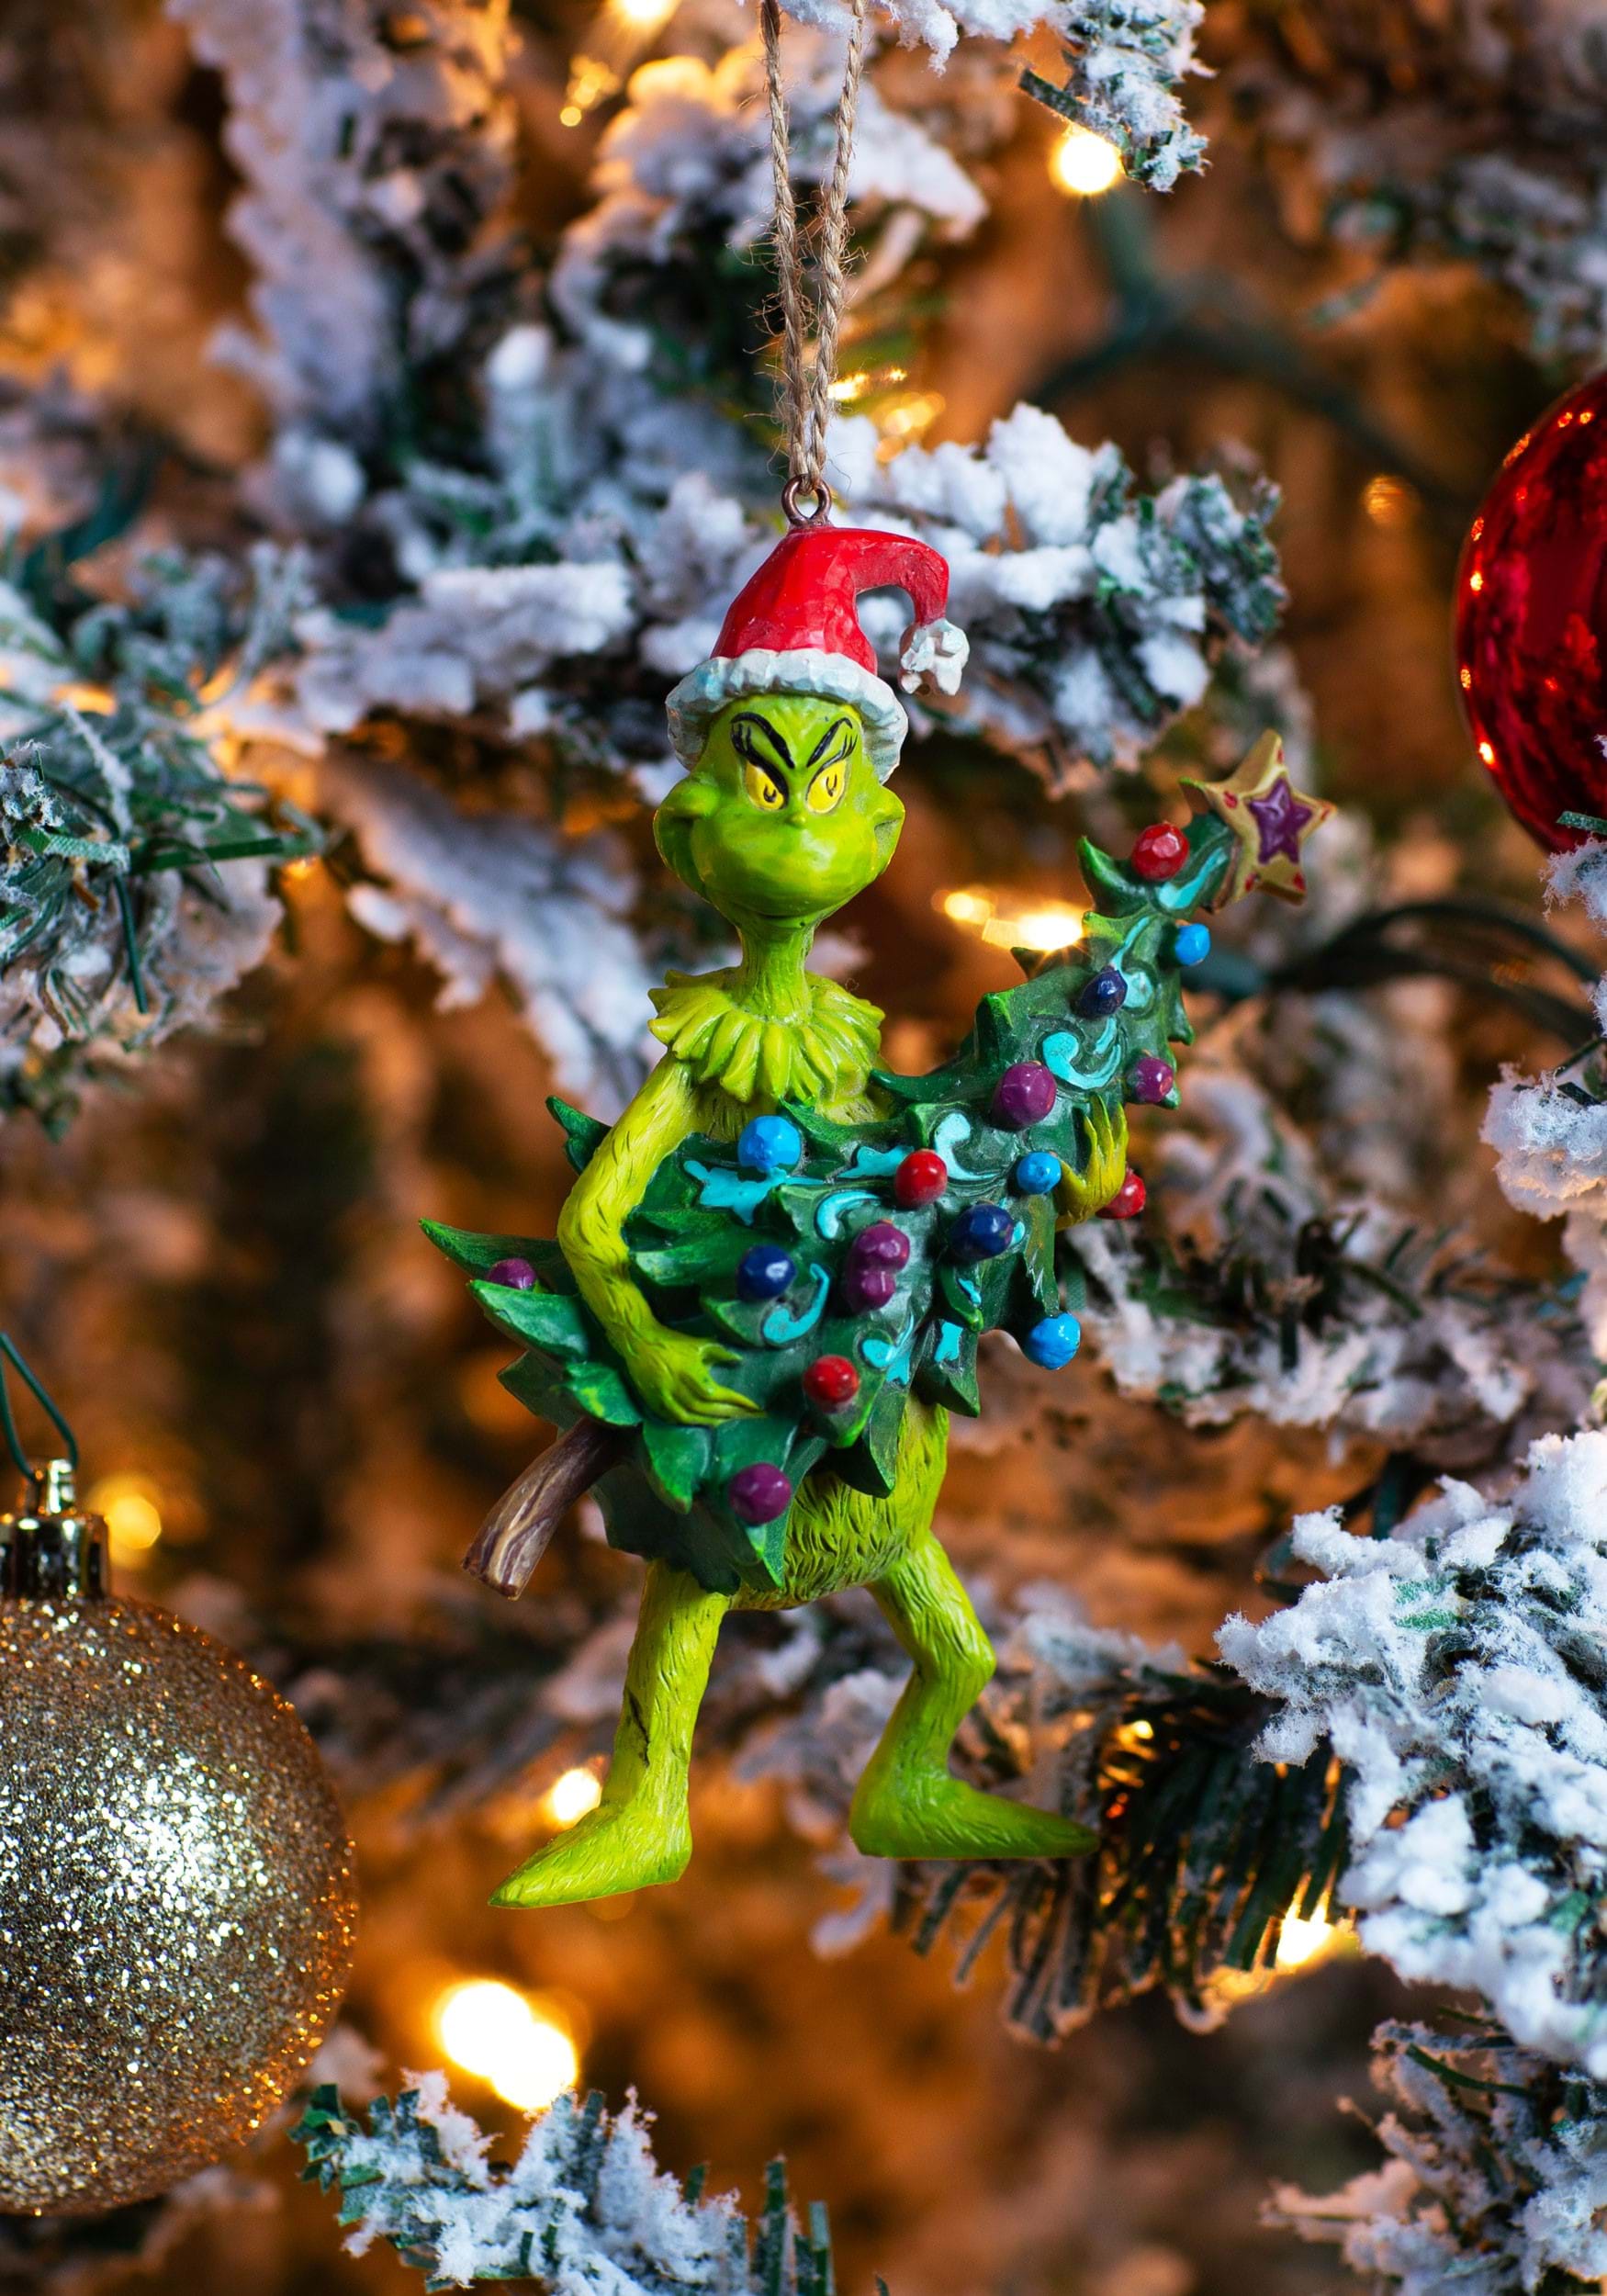 The Grinch Holding Tree Jim Shore Ornament